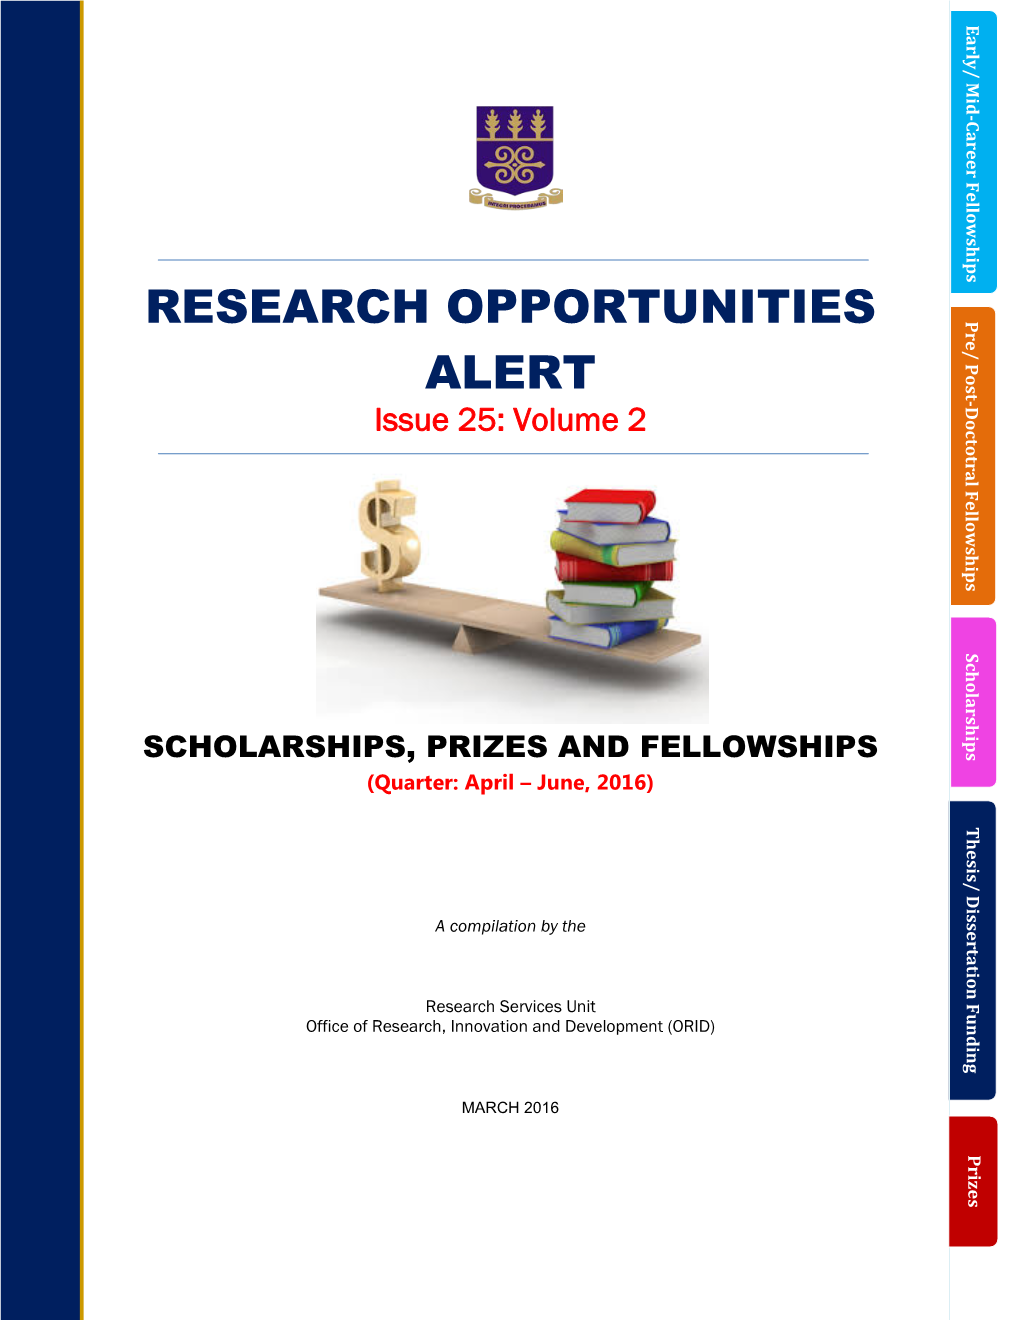 Volume 2: Prizes, Fellowships and Scholarships